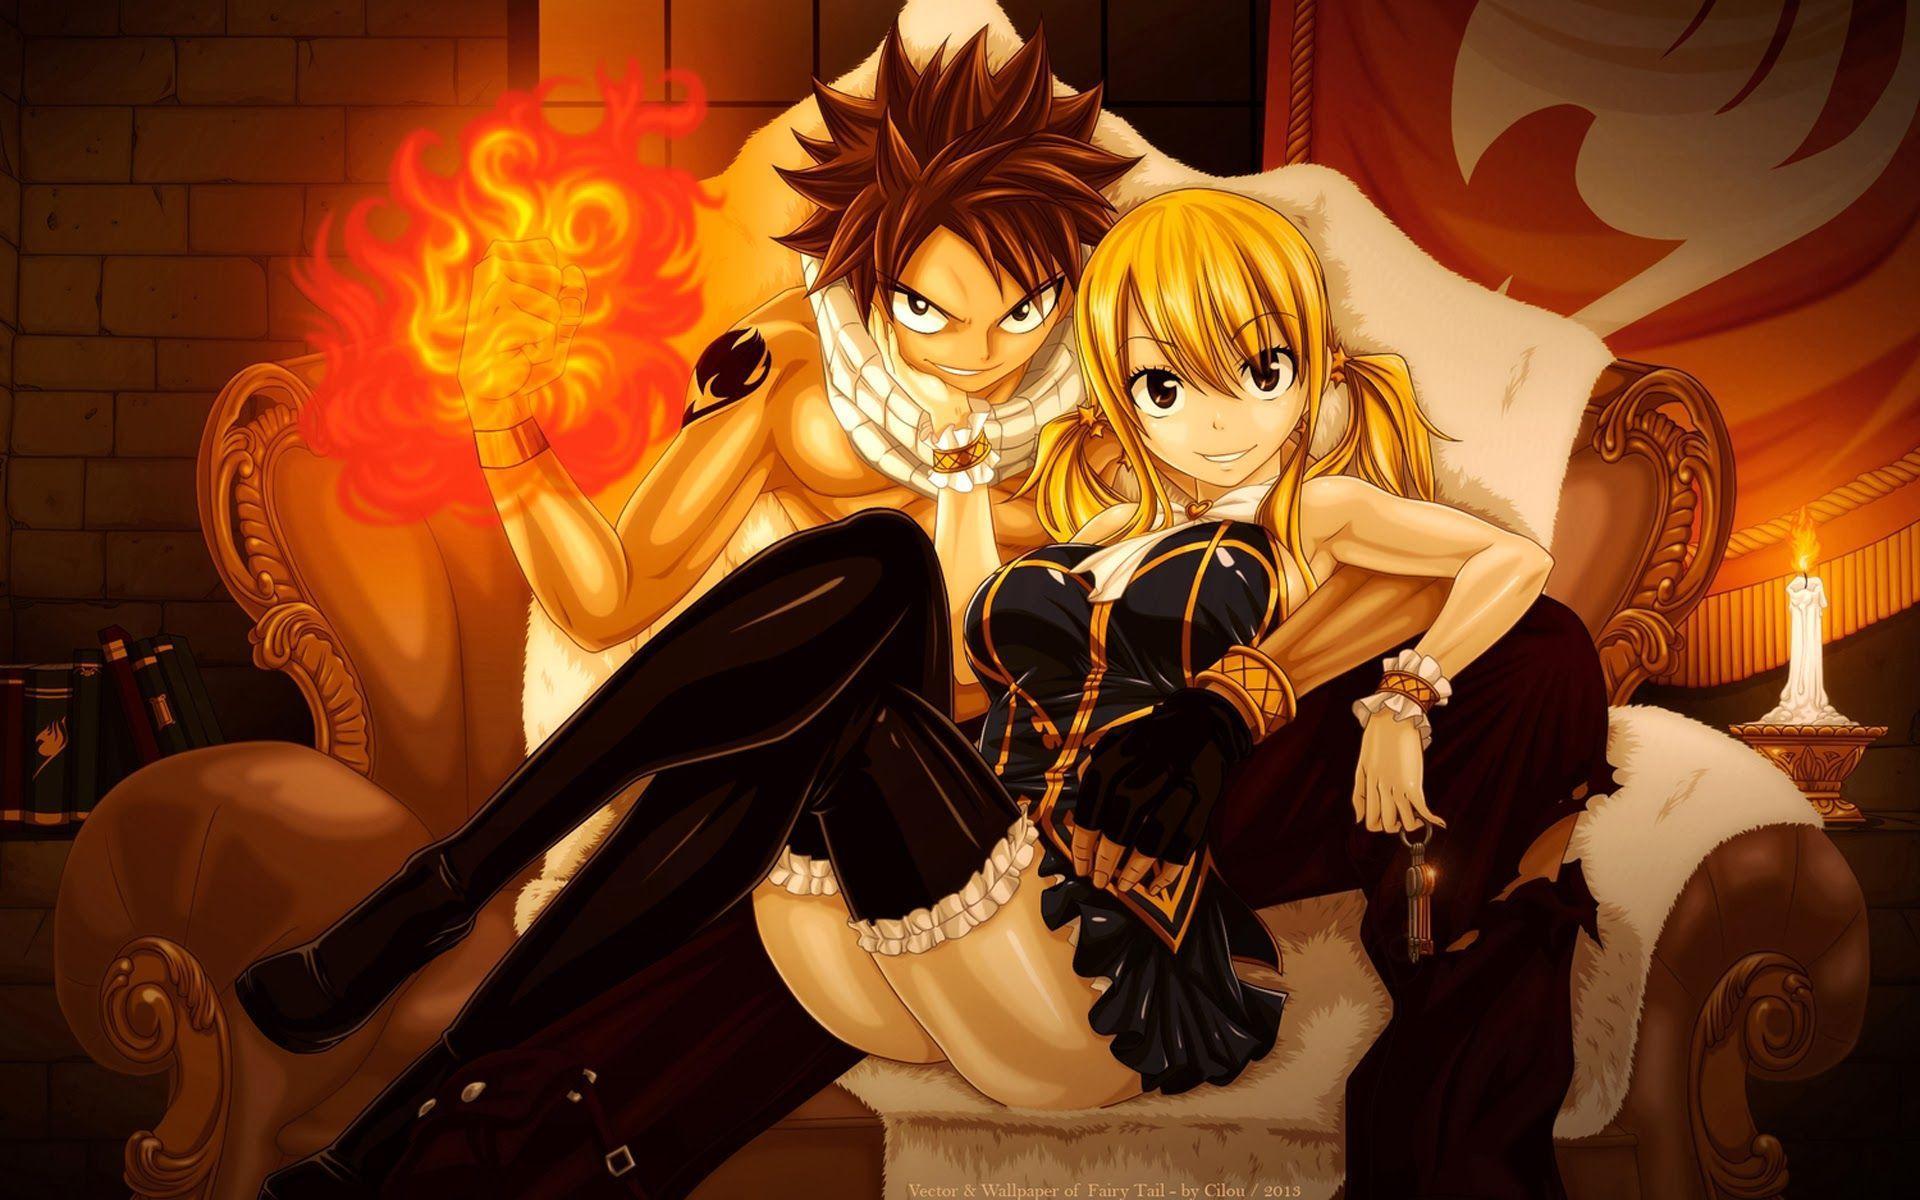 Wallpapers For > Fairy Tail Natsu Wallpapers Hd